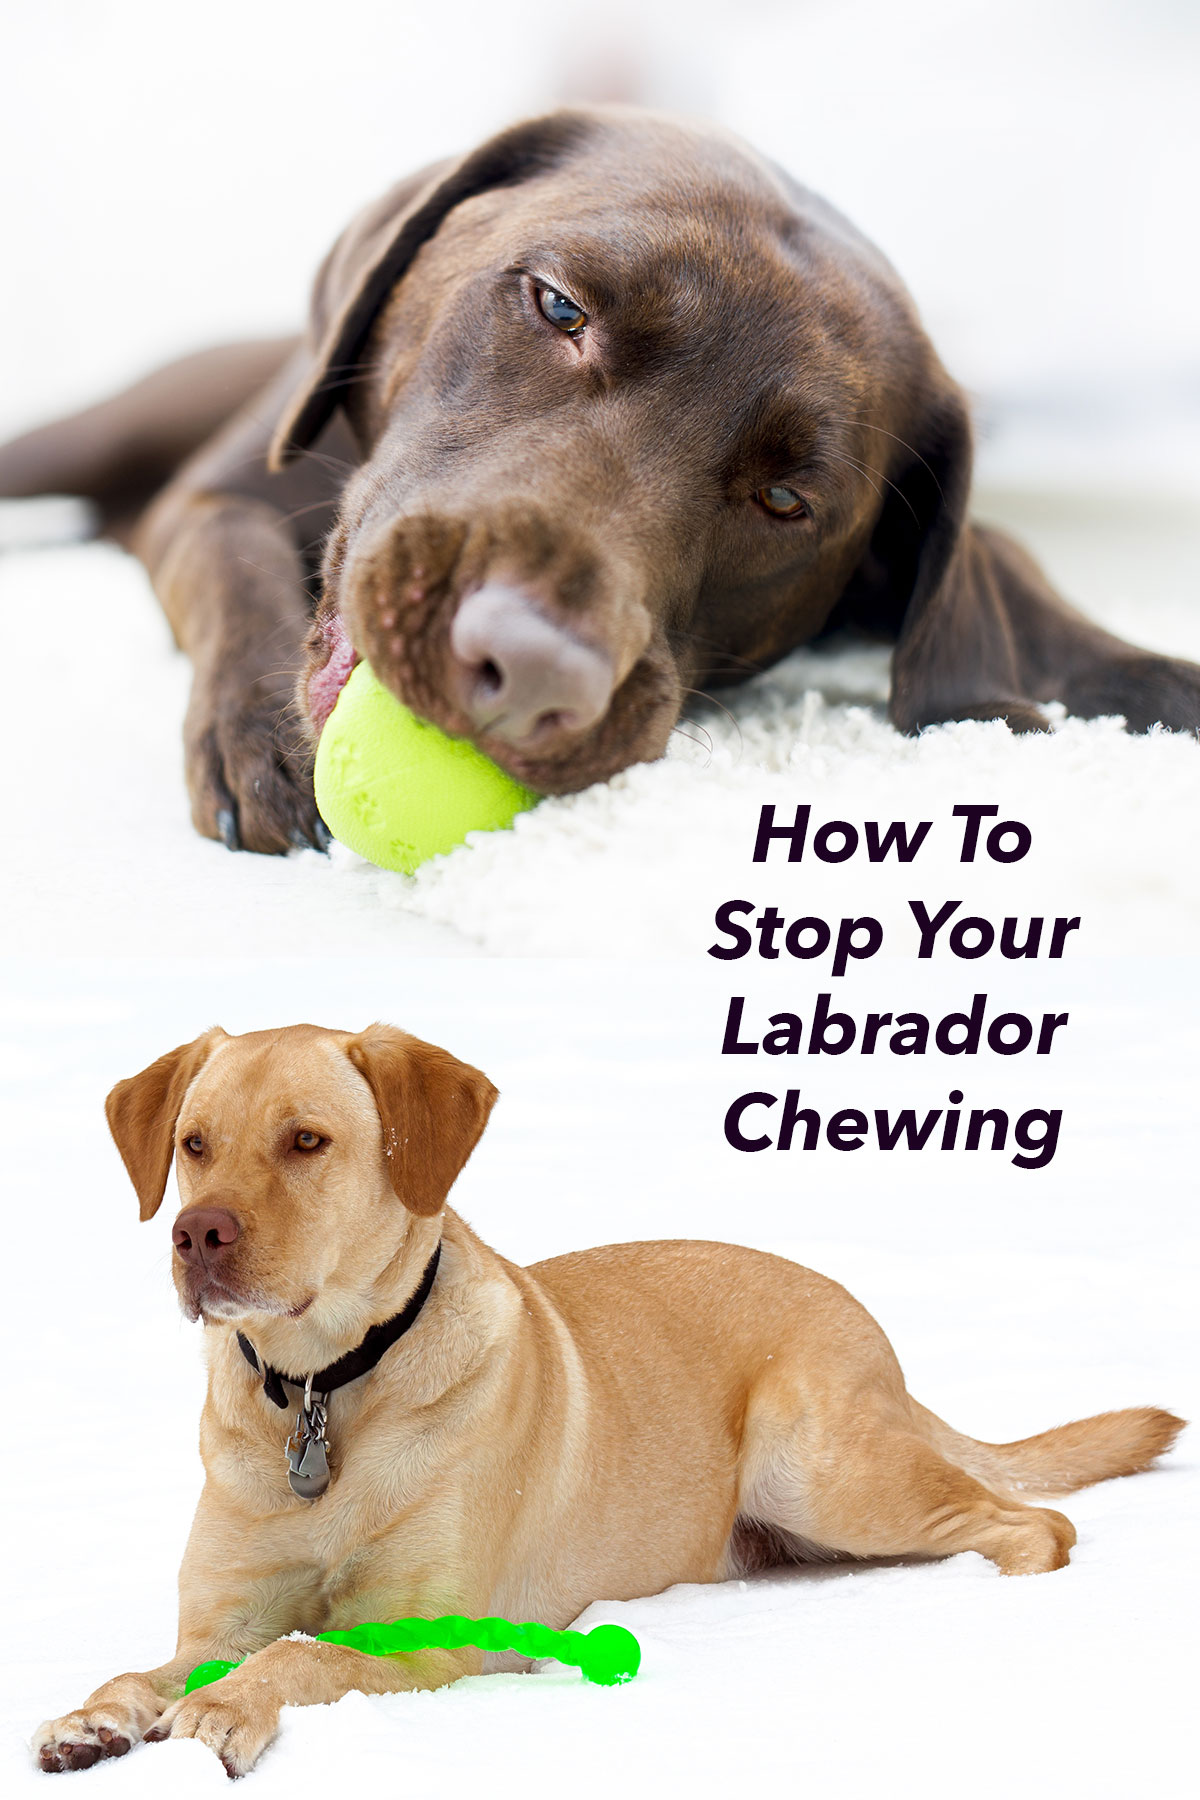 How To Stop A Dog From Chewing And Survive The Lab Chewing Phase